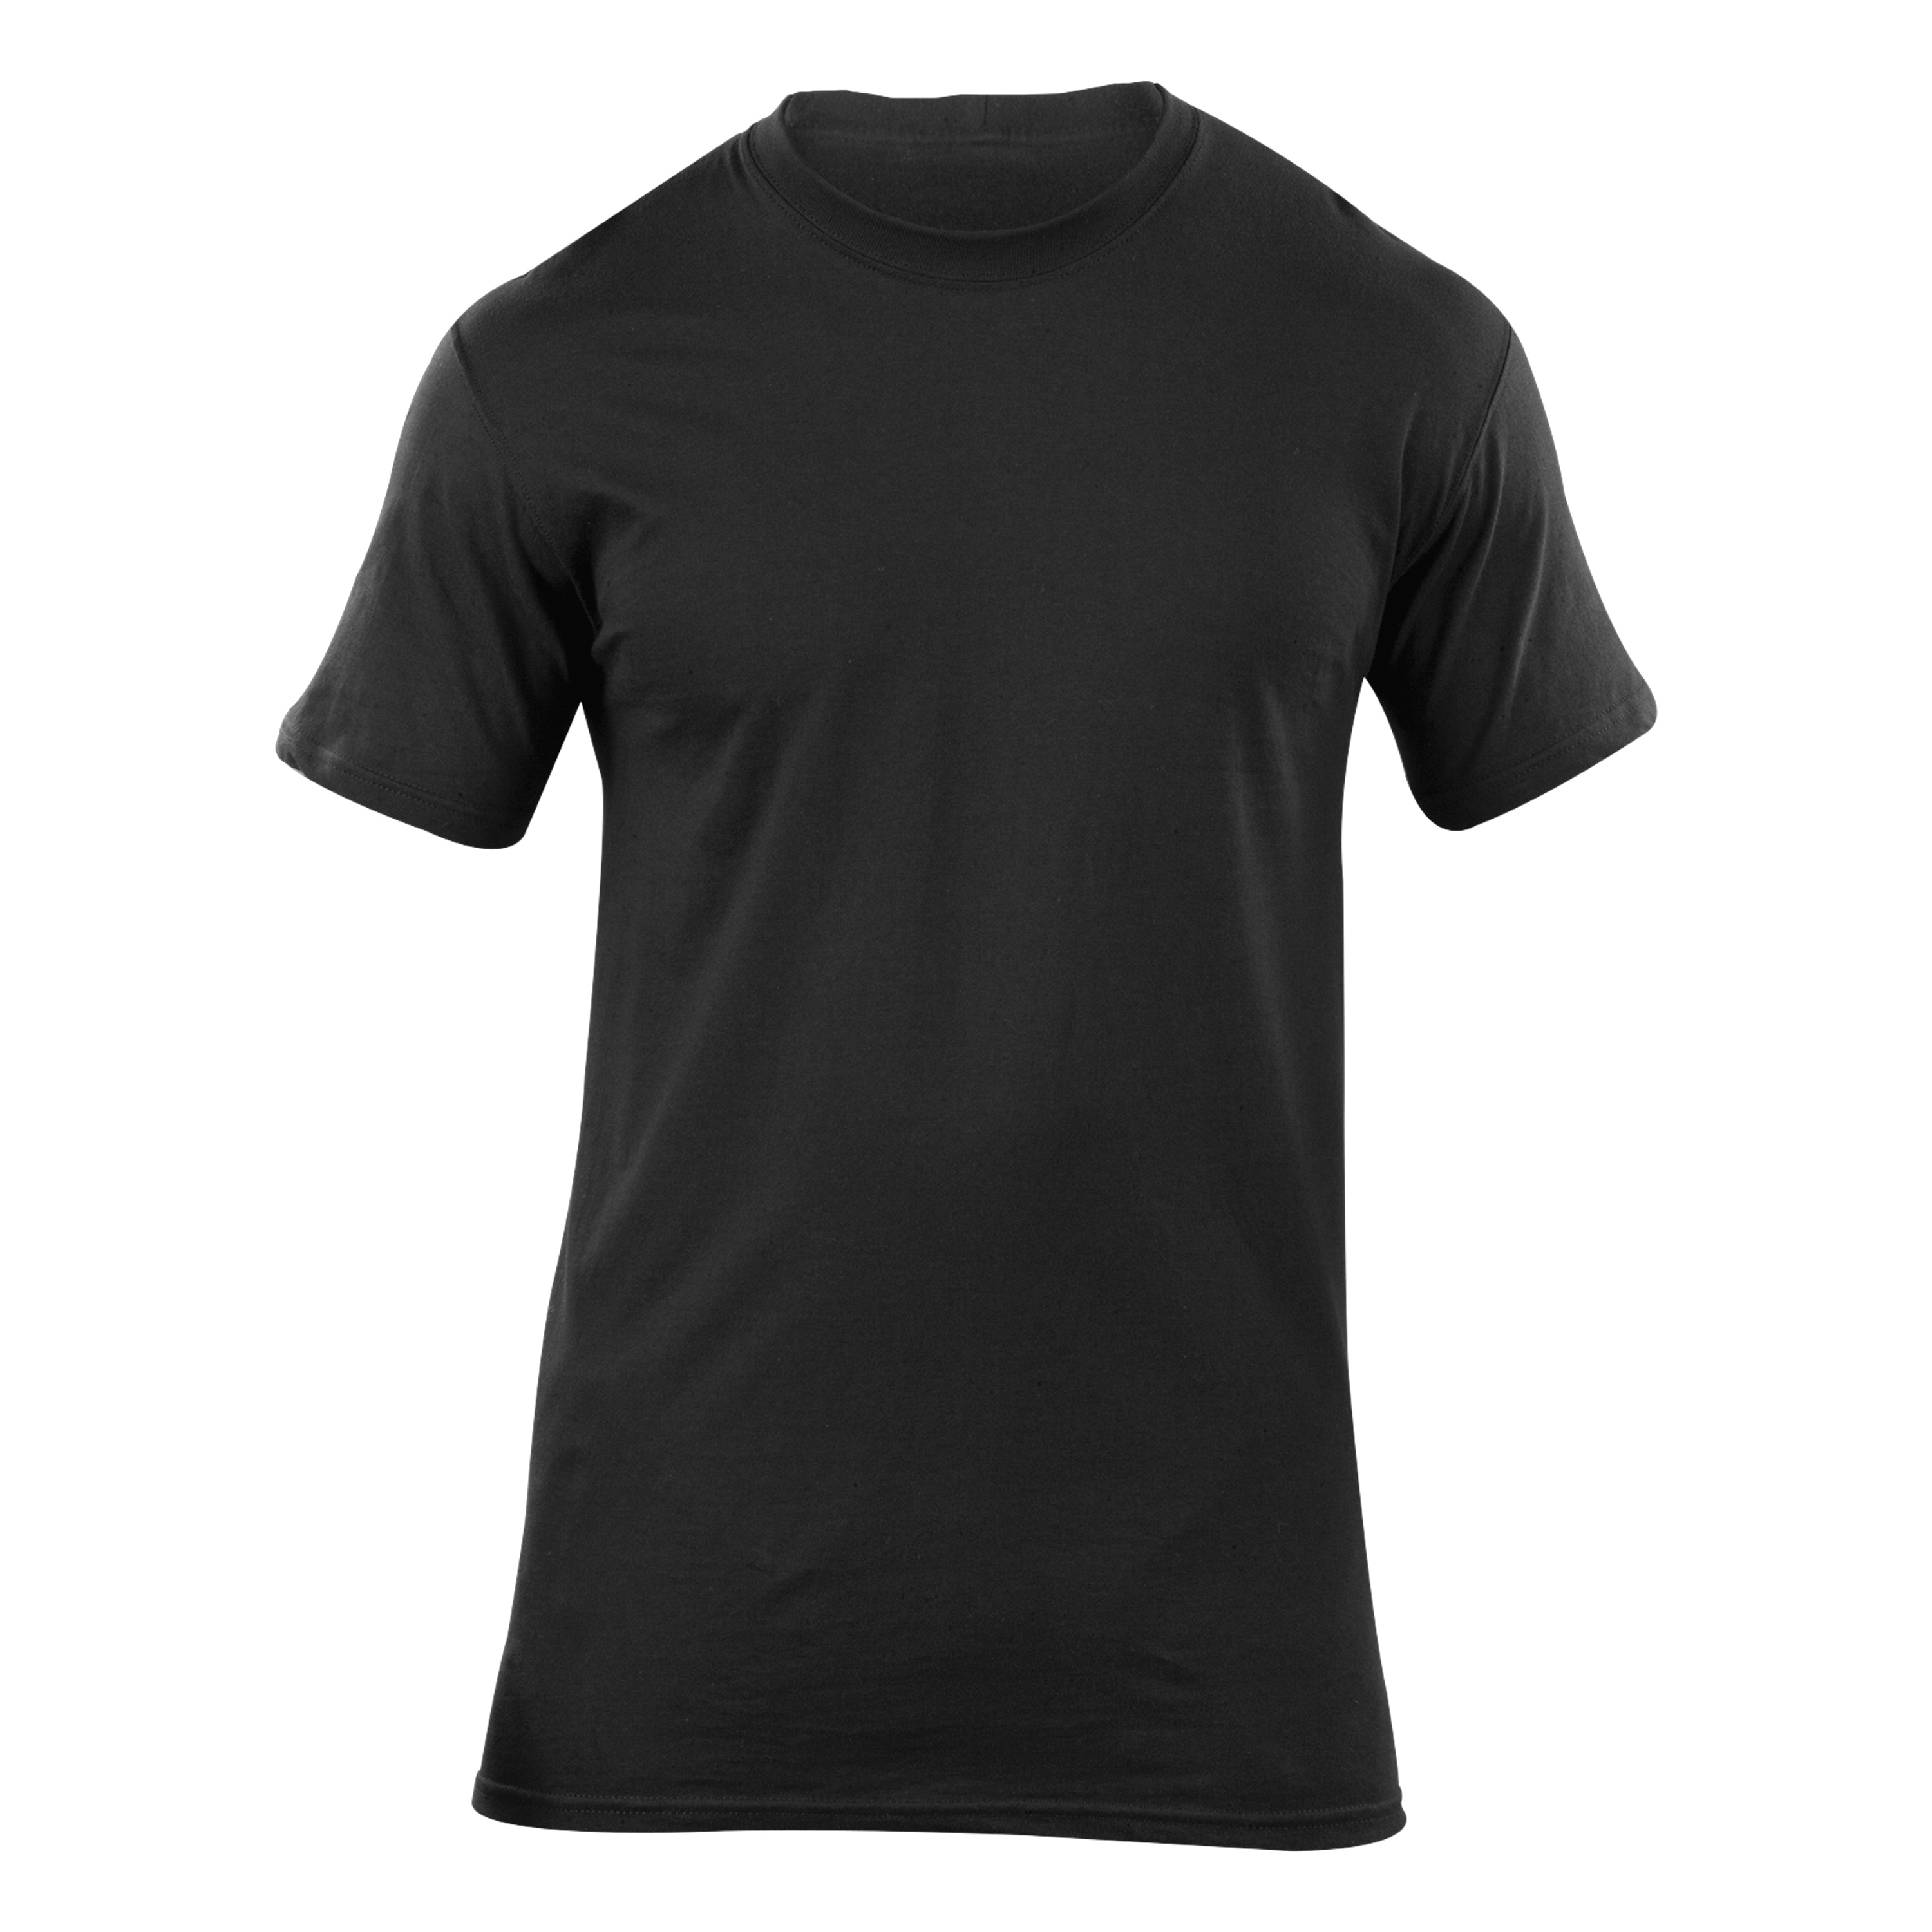 Purchase the 5.11 Shirt Utili-T Crew ACU black 3-Pack by ASMC